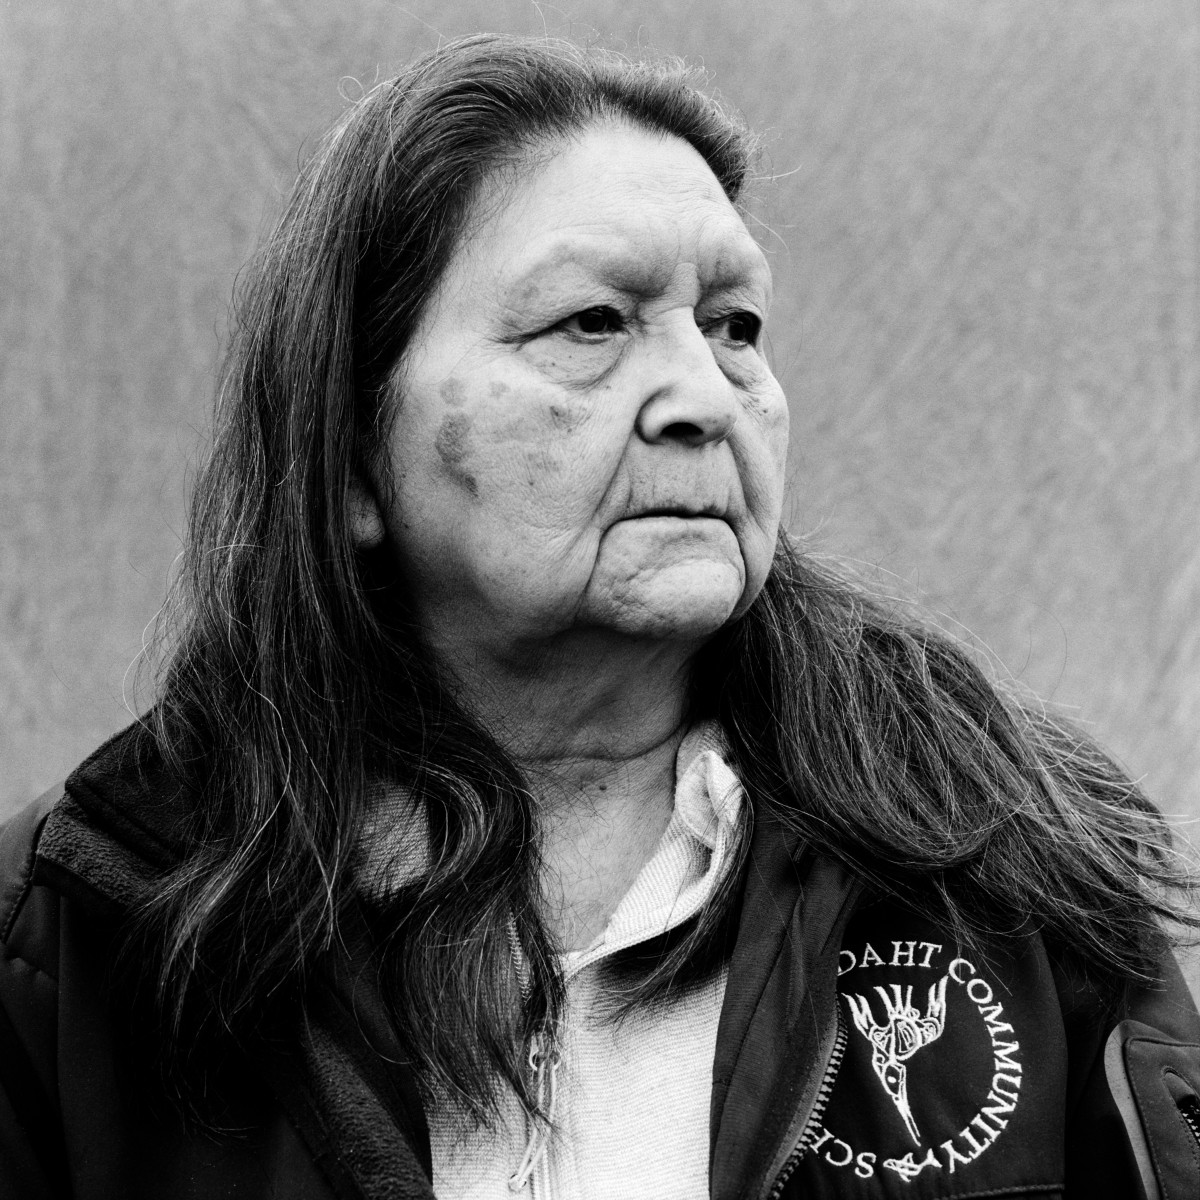 Frances Tate was born and raised near Nitinaht Lake. The 77-year-old was raised in a fluent household but lost much of her language while attending residential school.   In her late-50's, she began taking language classes through the Ditidaht Community School. She now identifies as semi-fluent. She helps children with the pronunciation of words and phrases at the school.  "Some of our elders say that [our language] is very close to being extinct – it’s very close to being gone," she said.